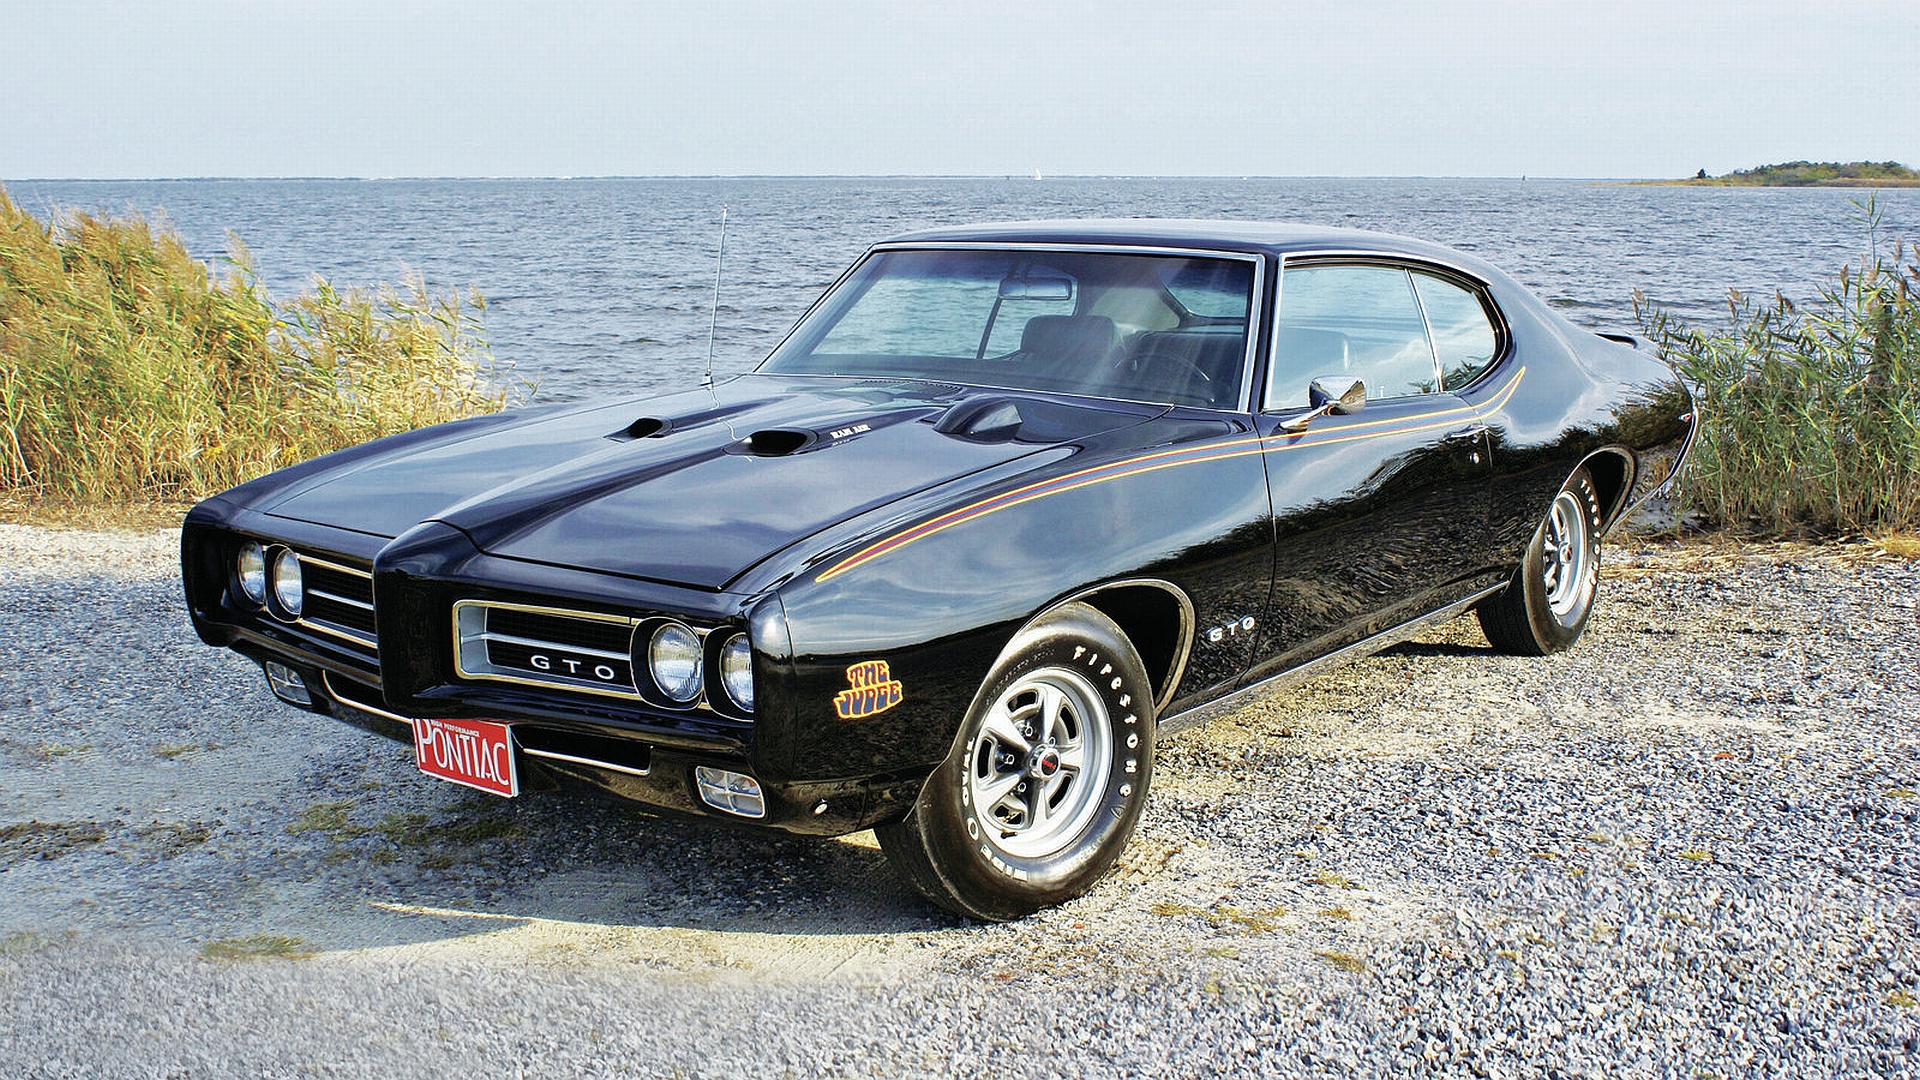 Black Pontiac GTO muscle car on a scenic road, surrounded by nature